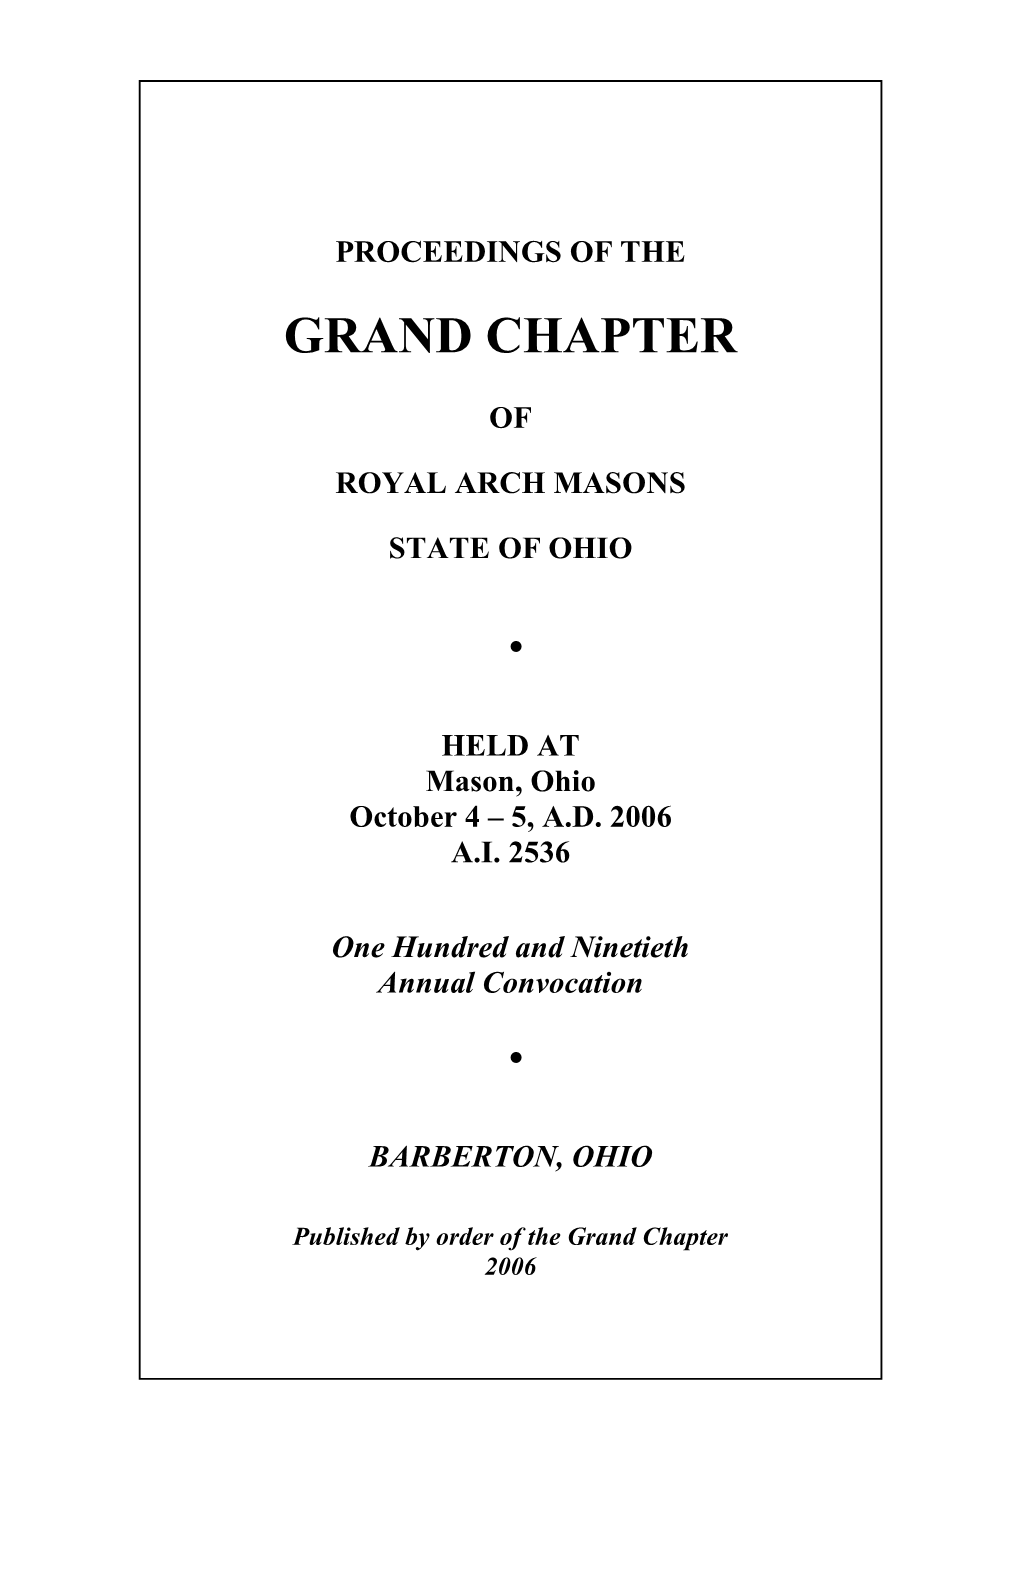 Grand Chapter Royal Arch Masons of Ohio